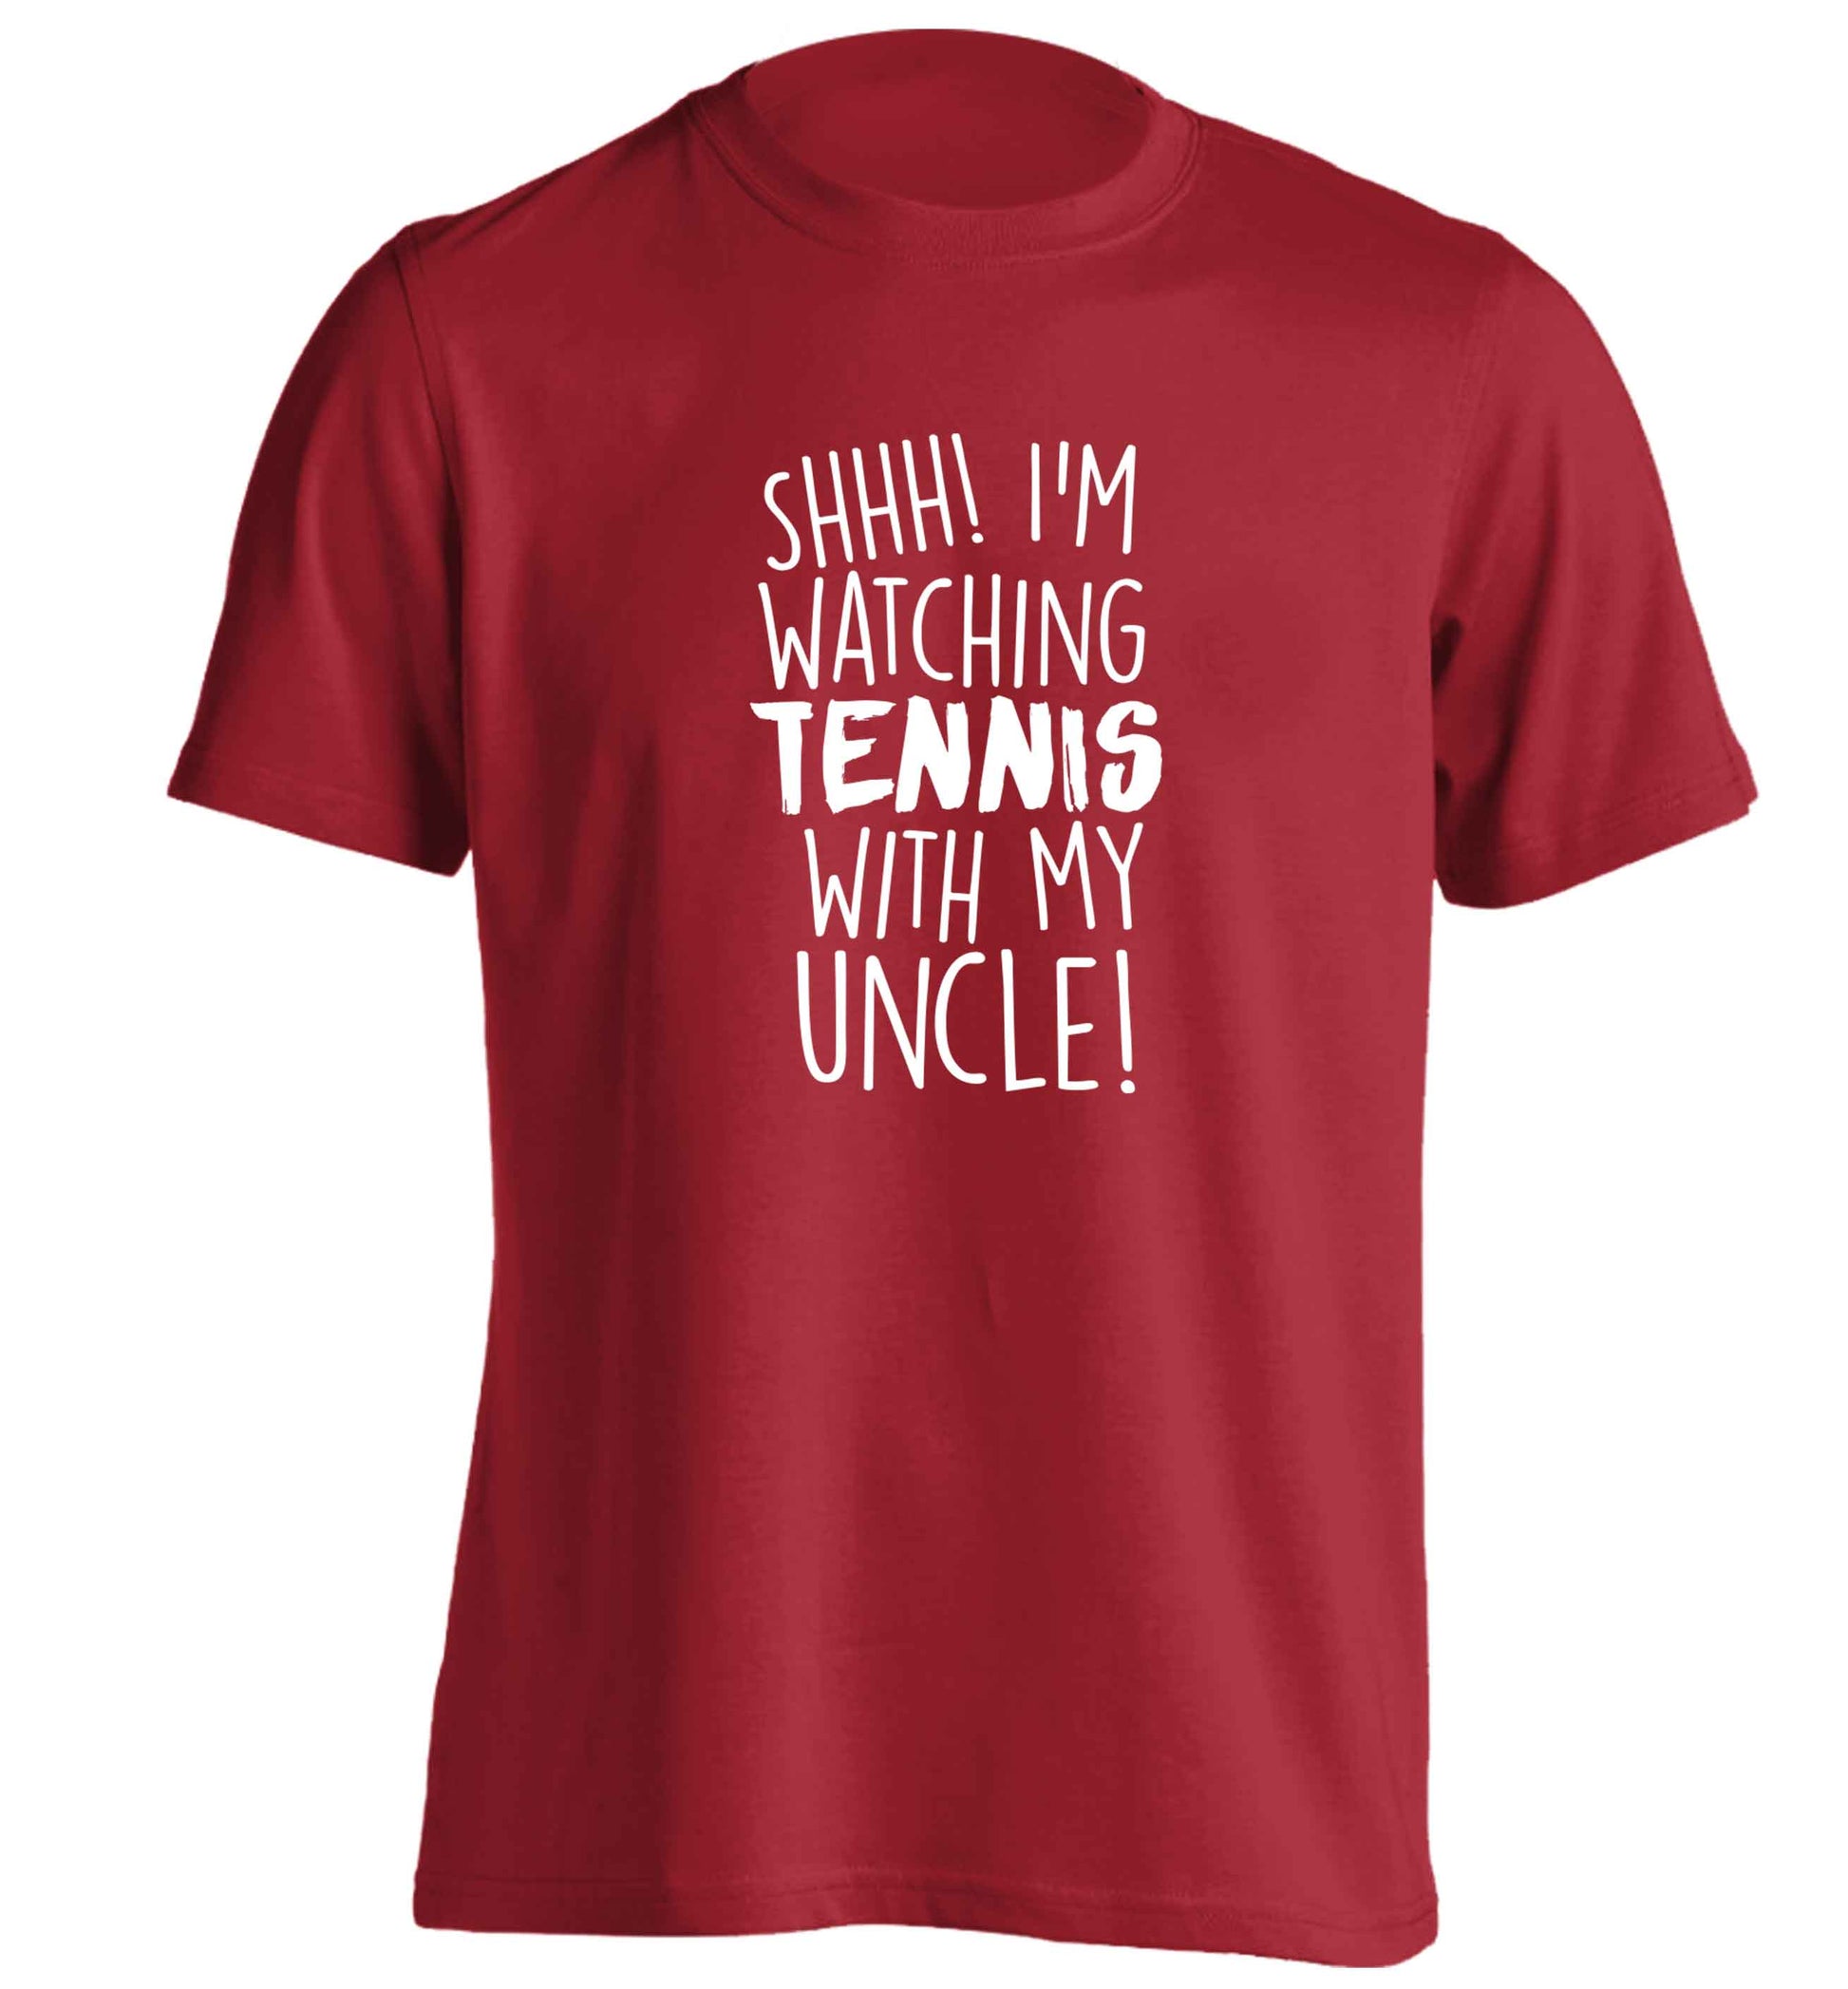 Shh! I'm watching tennis with my uncle! adults unisex red Tshirt 2XL